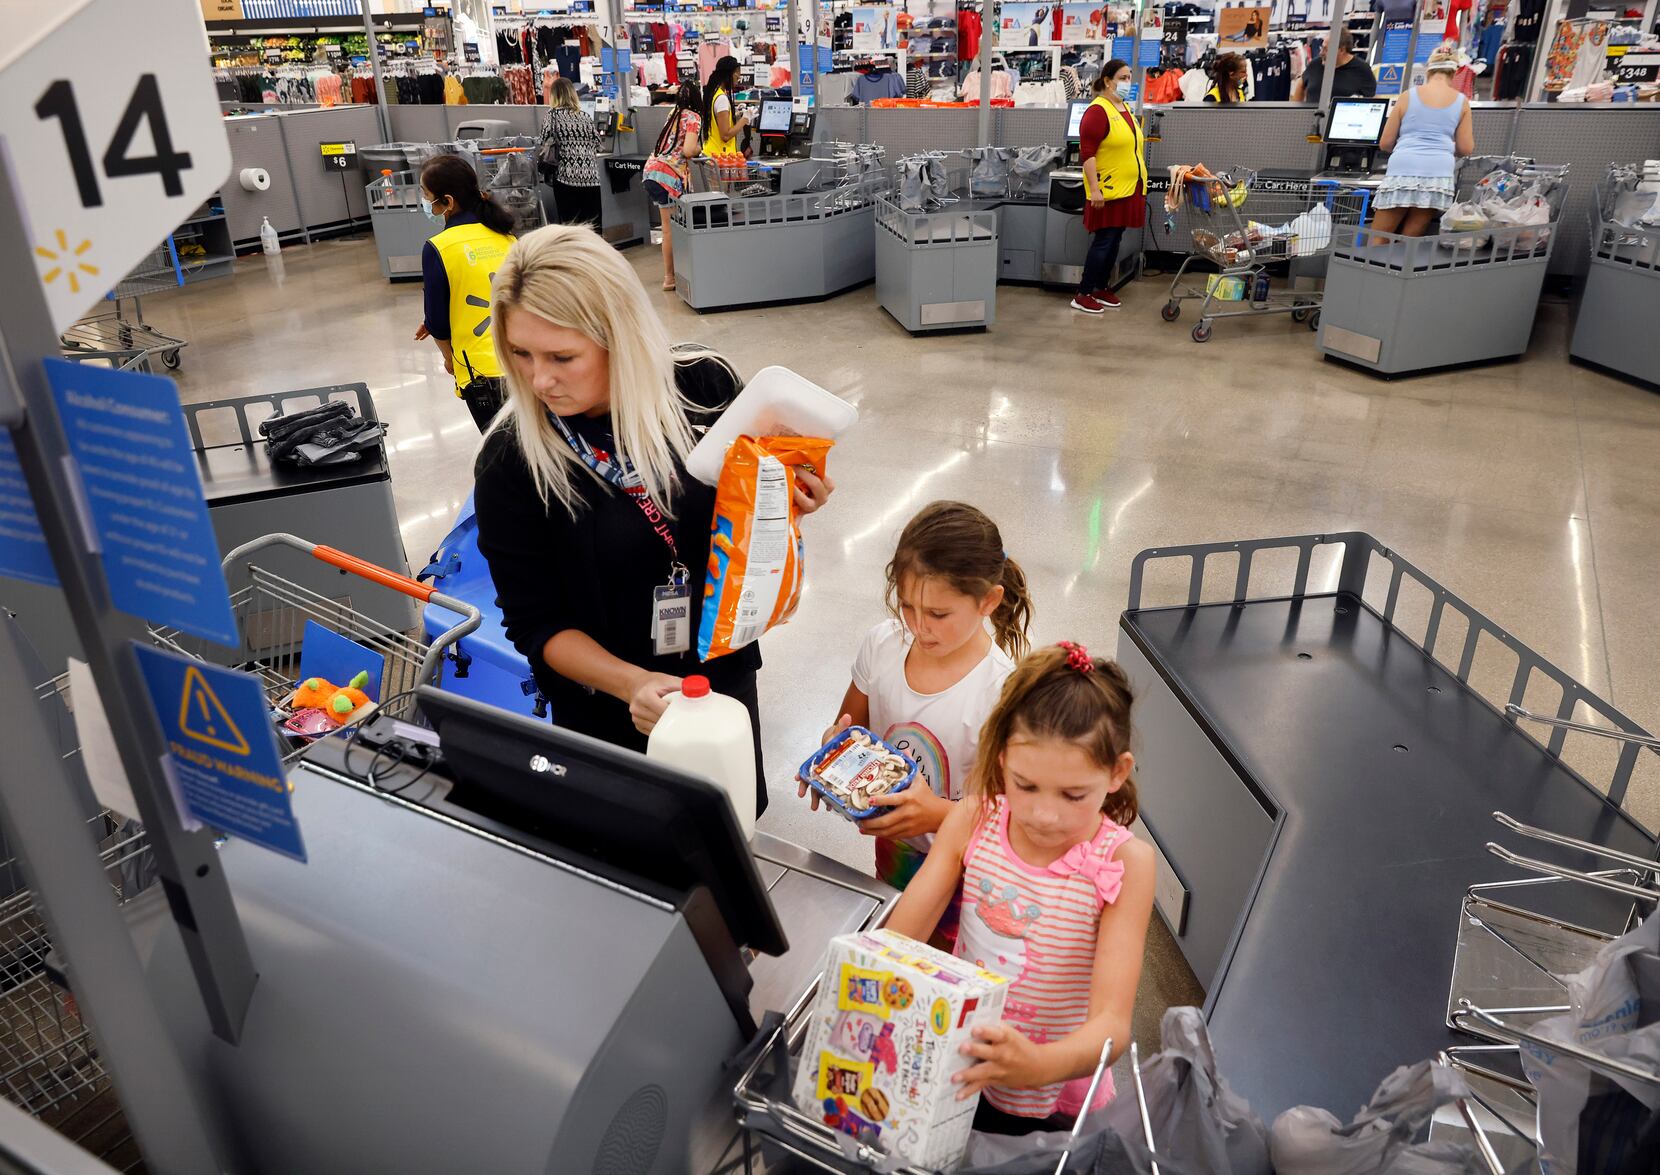 Walmart is testing an all-self-checkout Supercenter in Plano